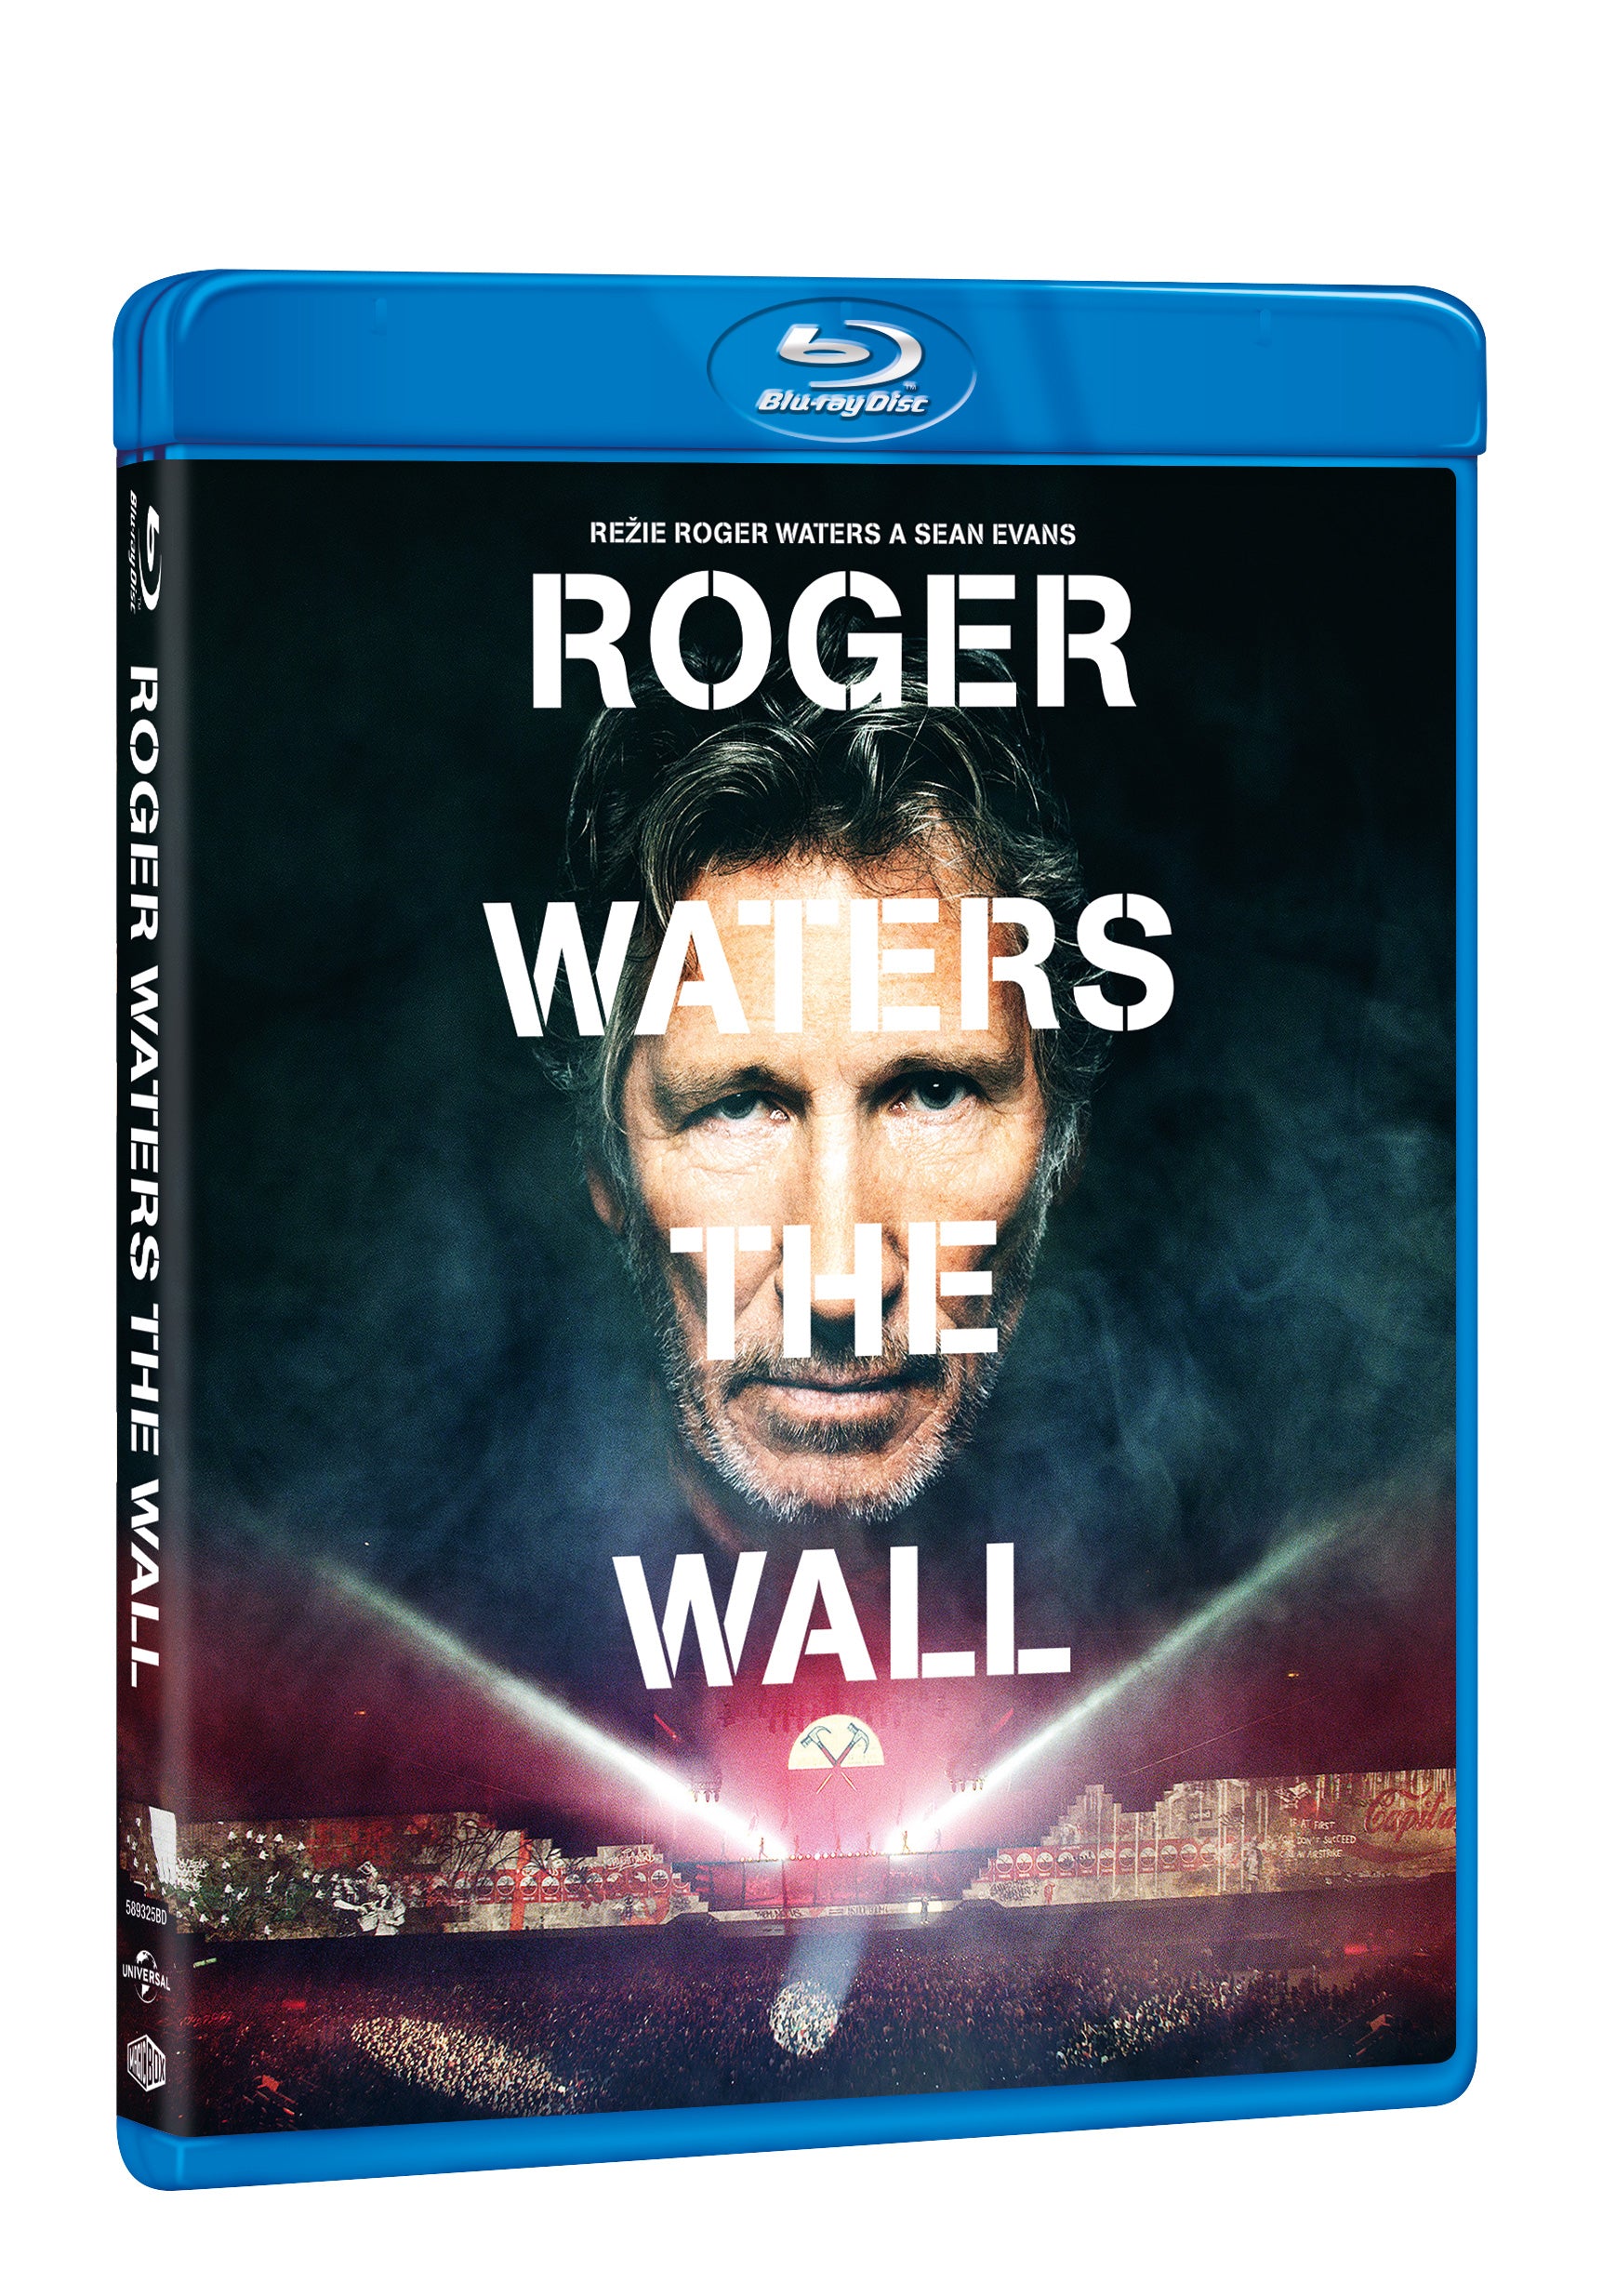 Roger Waters: The Wall BD / Roger Waters The Wall - Czech version